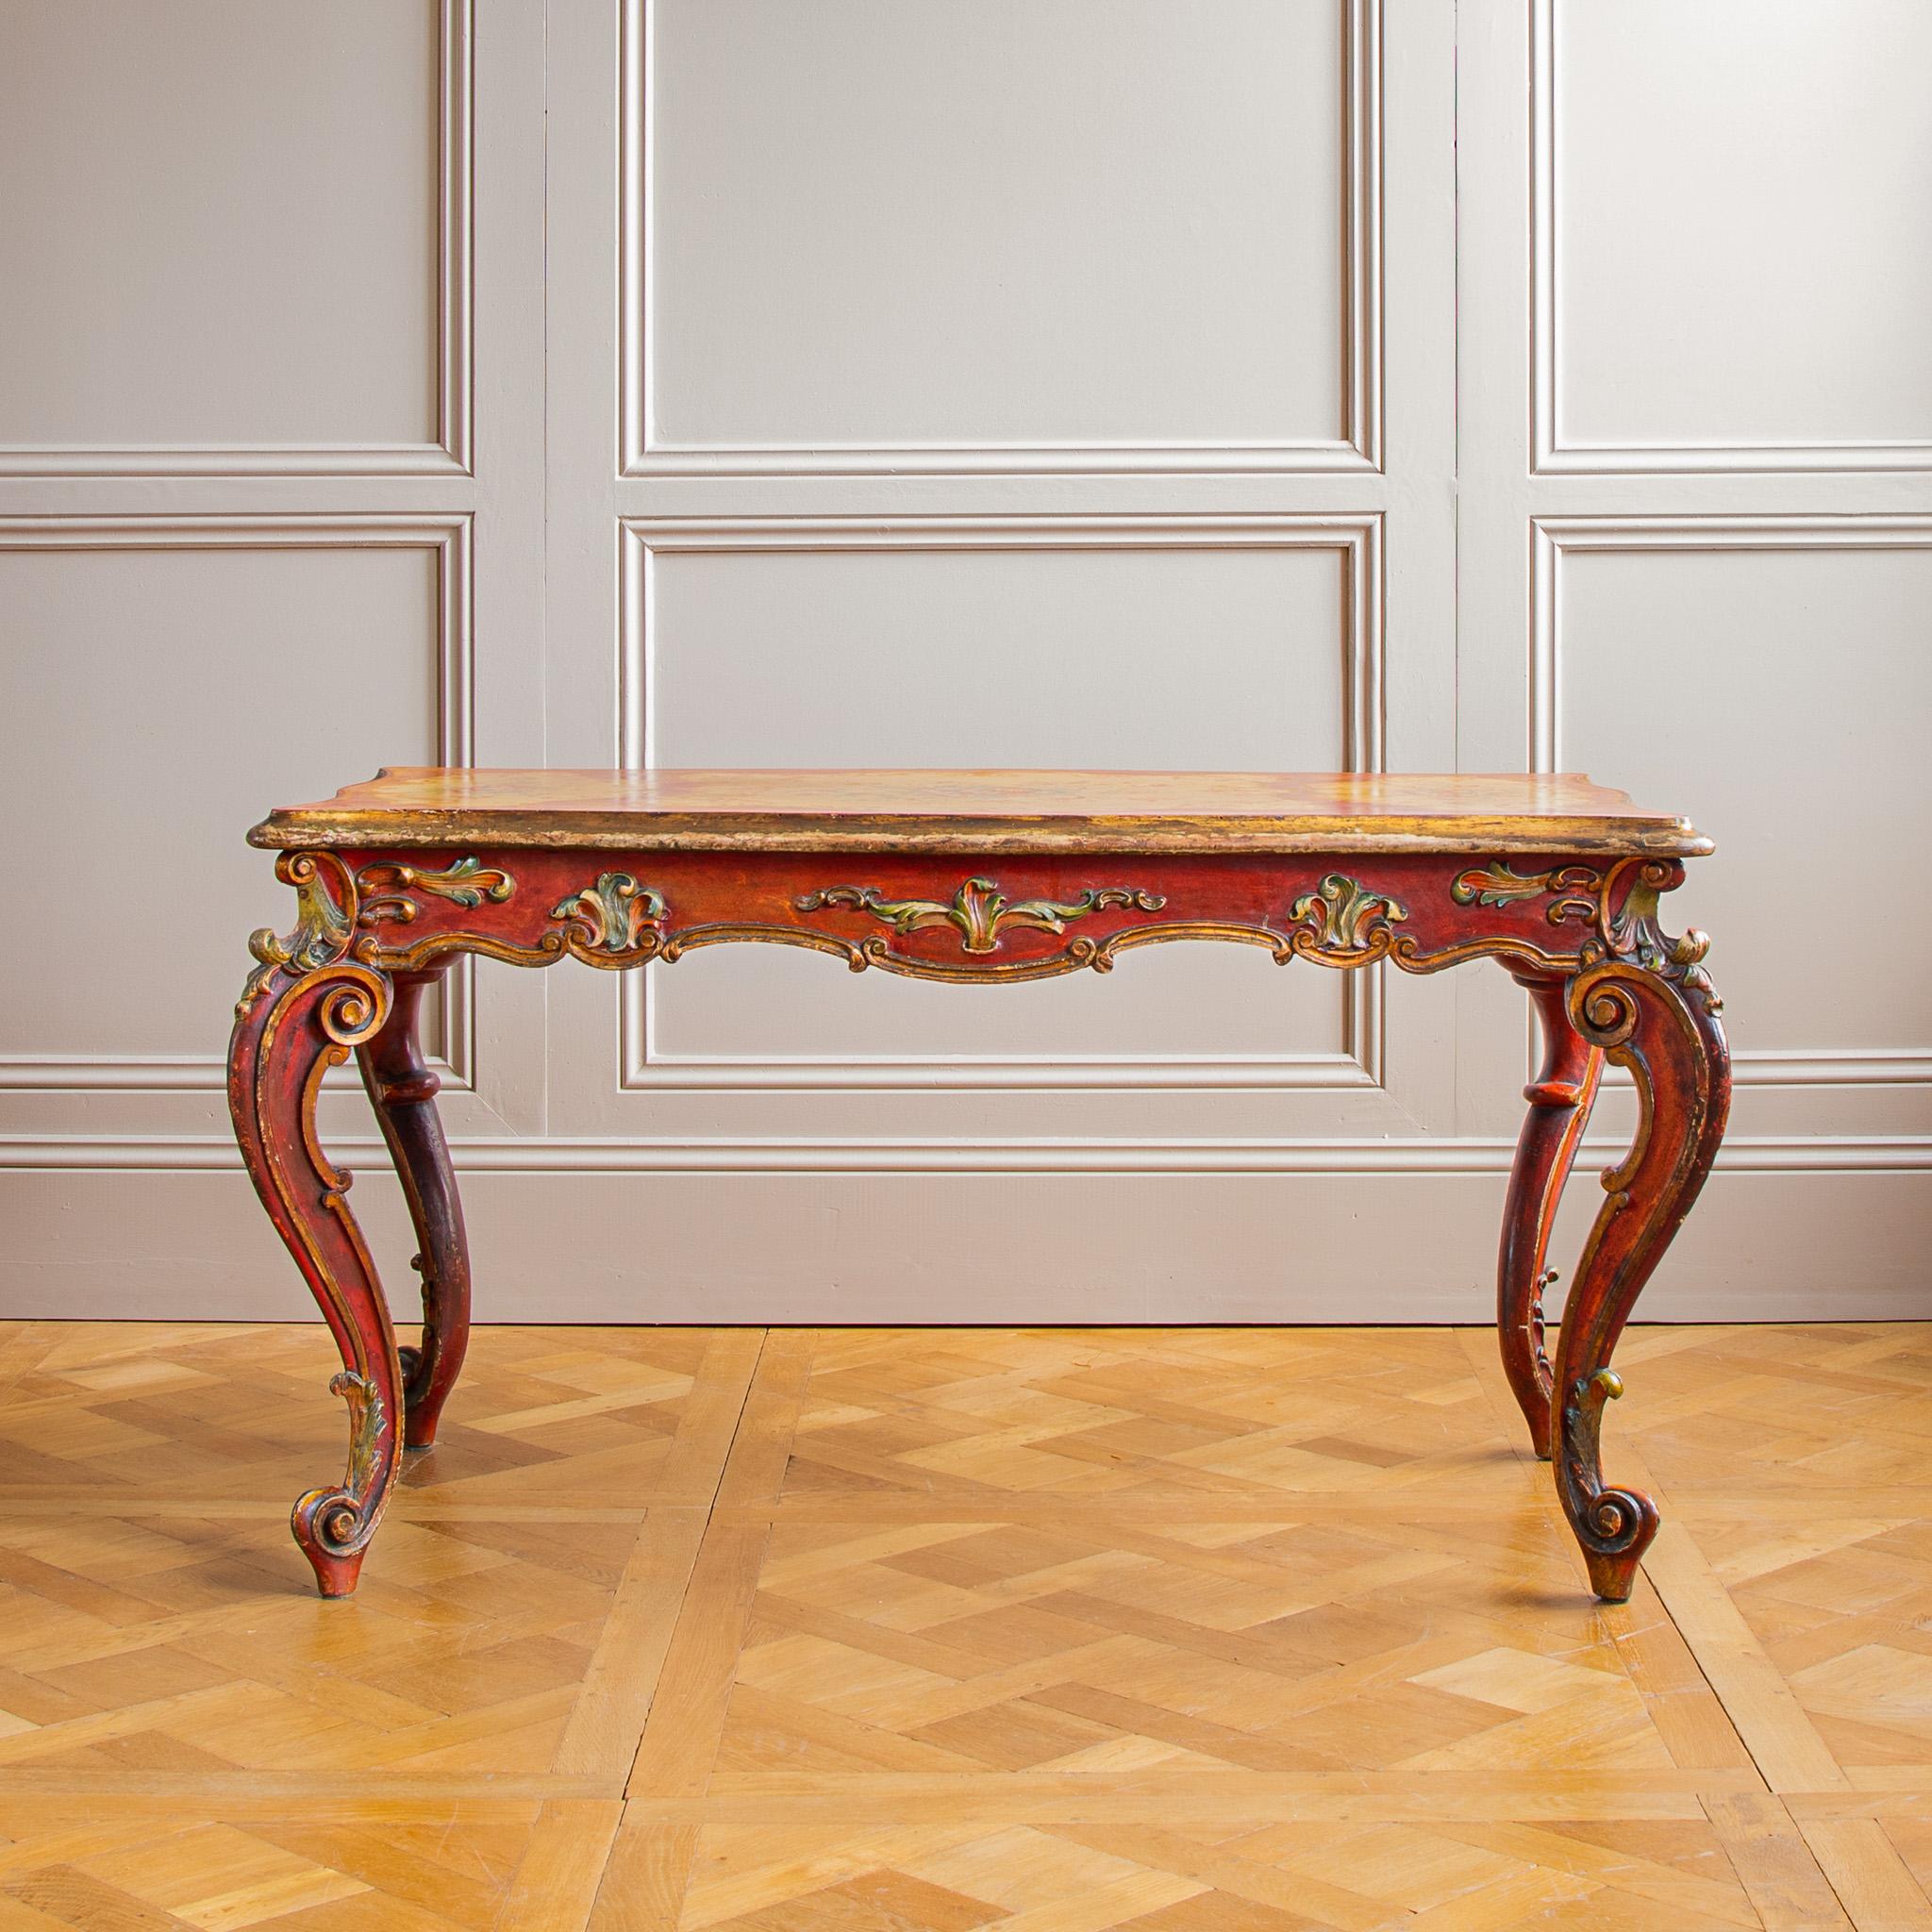  19th Century Italian Rococo Table Painted In The Venetian Style In Good Condition For Sale In London, Park Royal